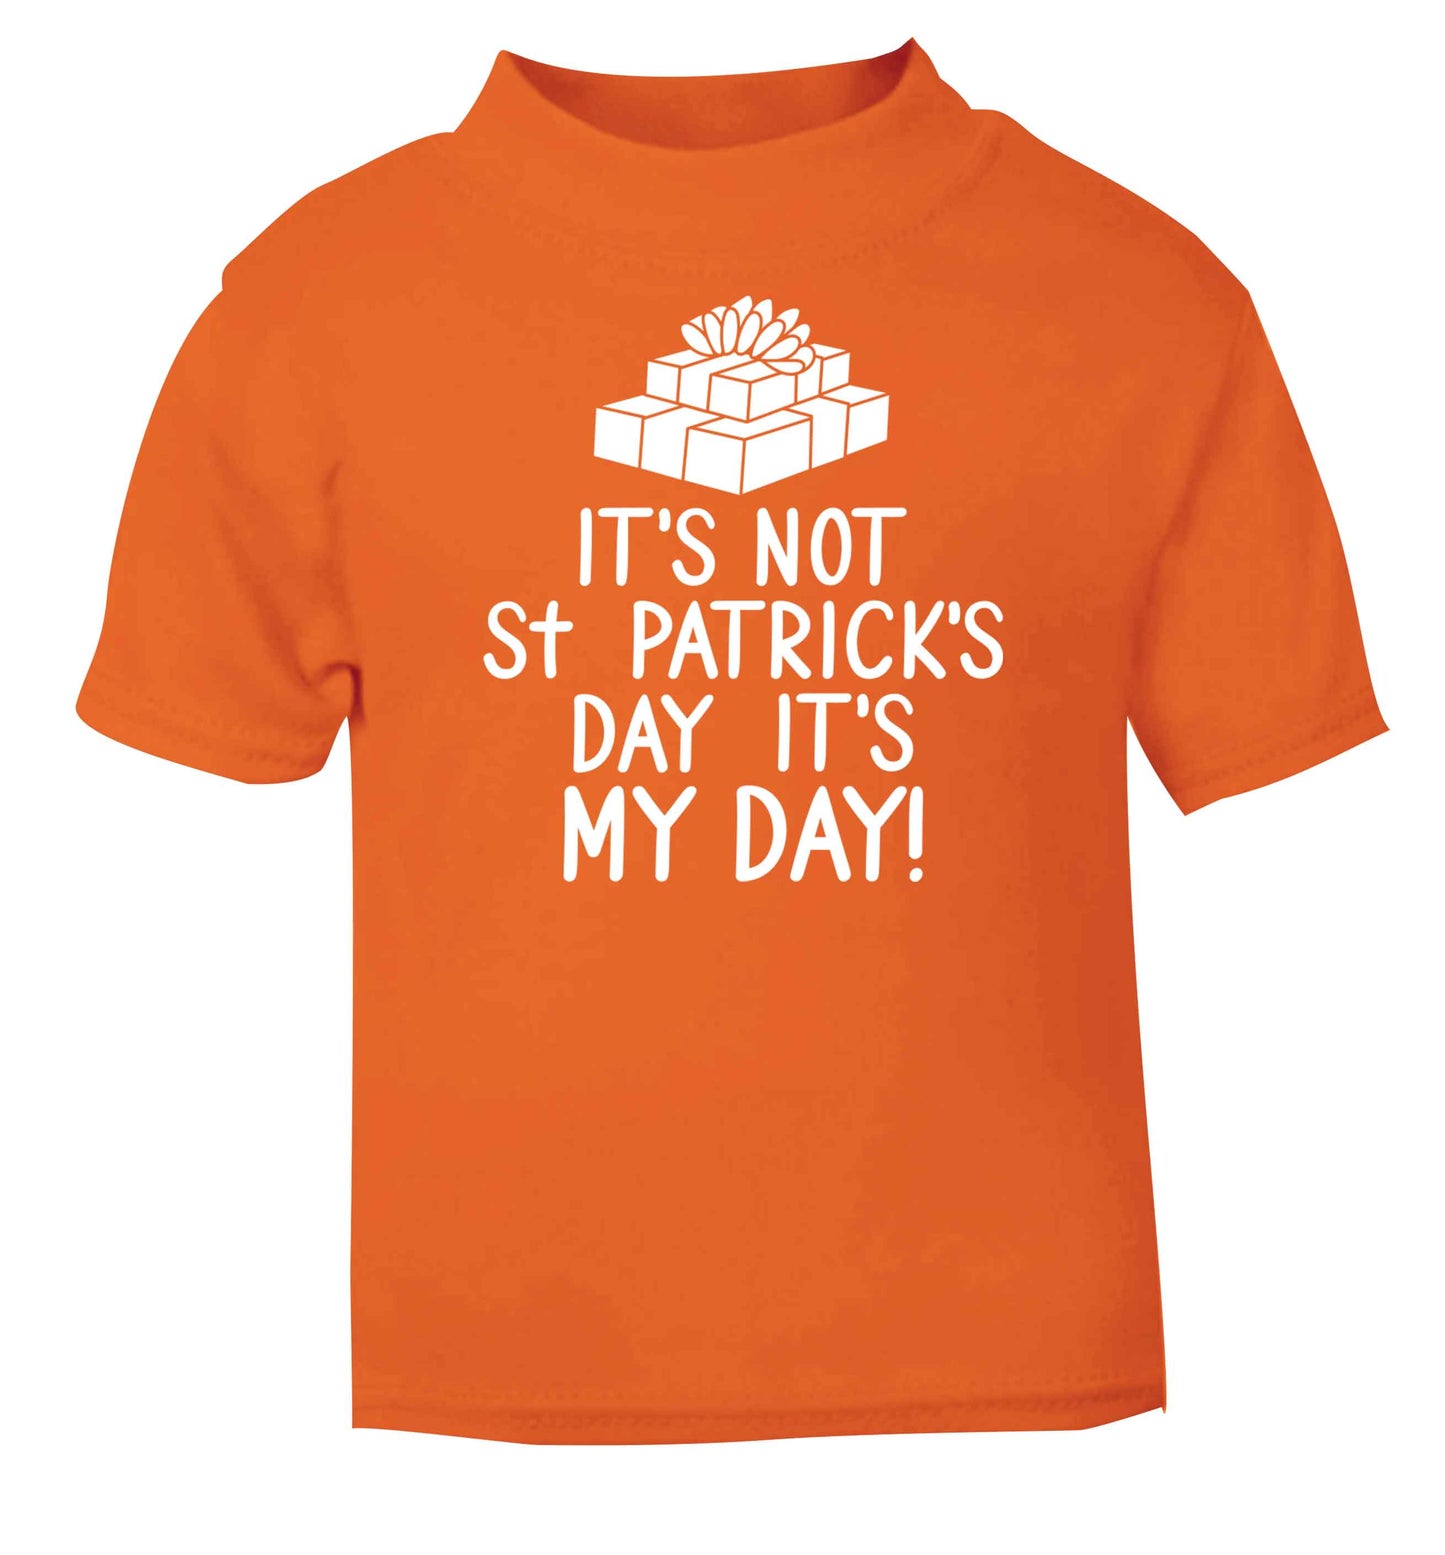 Funny gifts for your mum on mother's dayor her birthday! It's not St Patricks day it's my day orange baby toddler Tshirt 2 Years